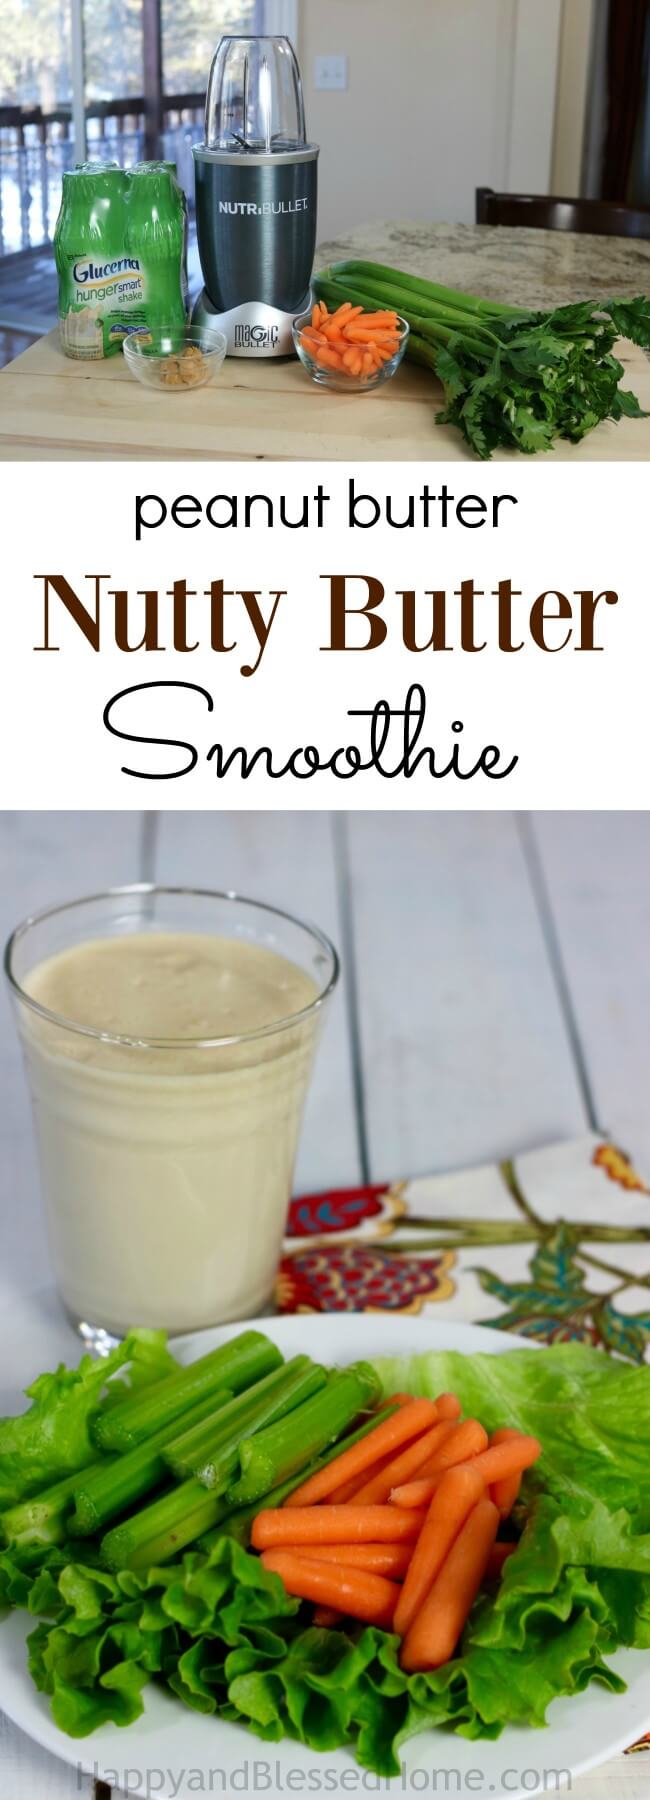 Hungry - Try a Nutty Butter Peanut Butter Smoothie - only 222 Calories